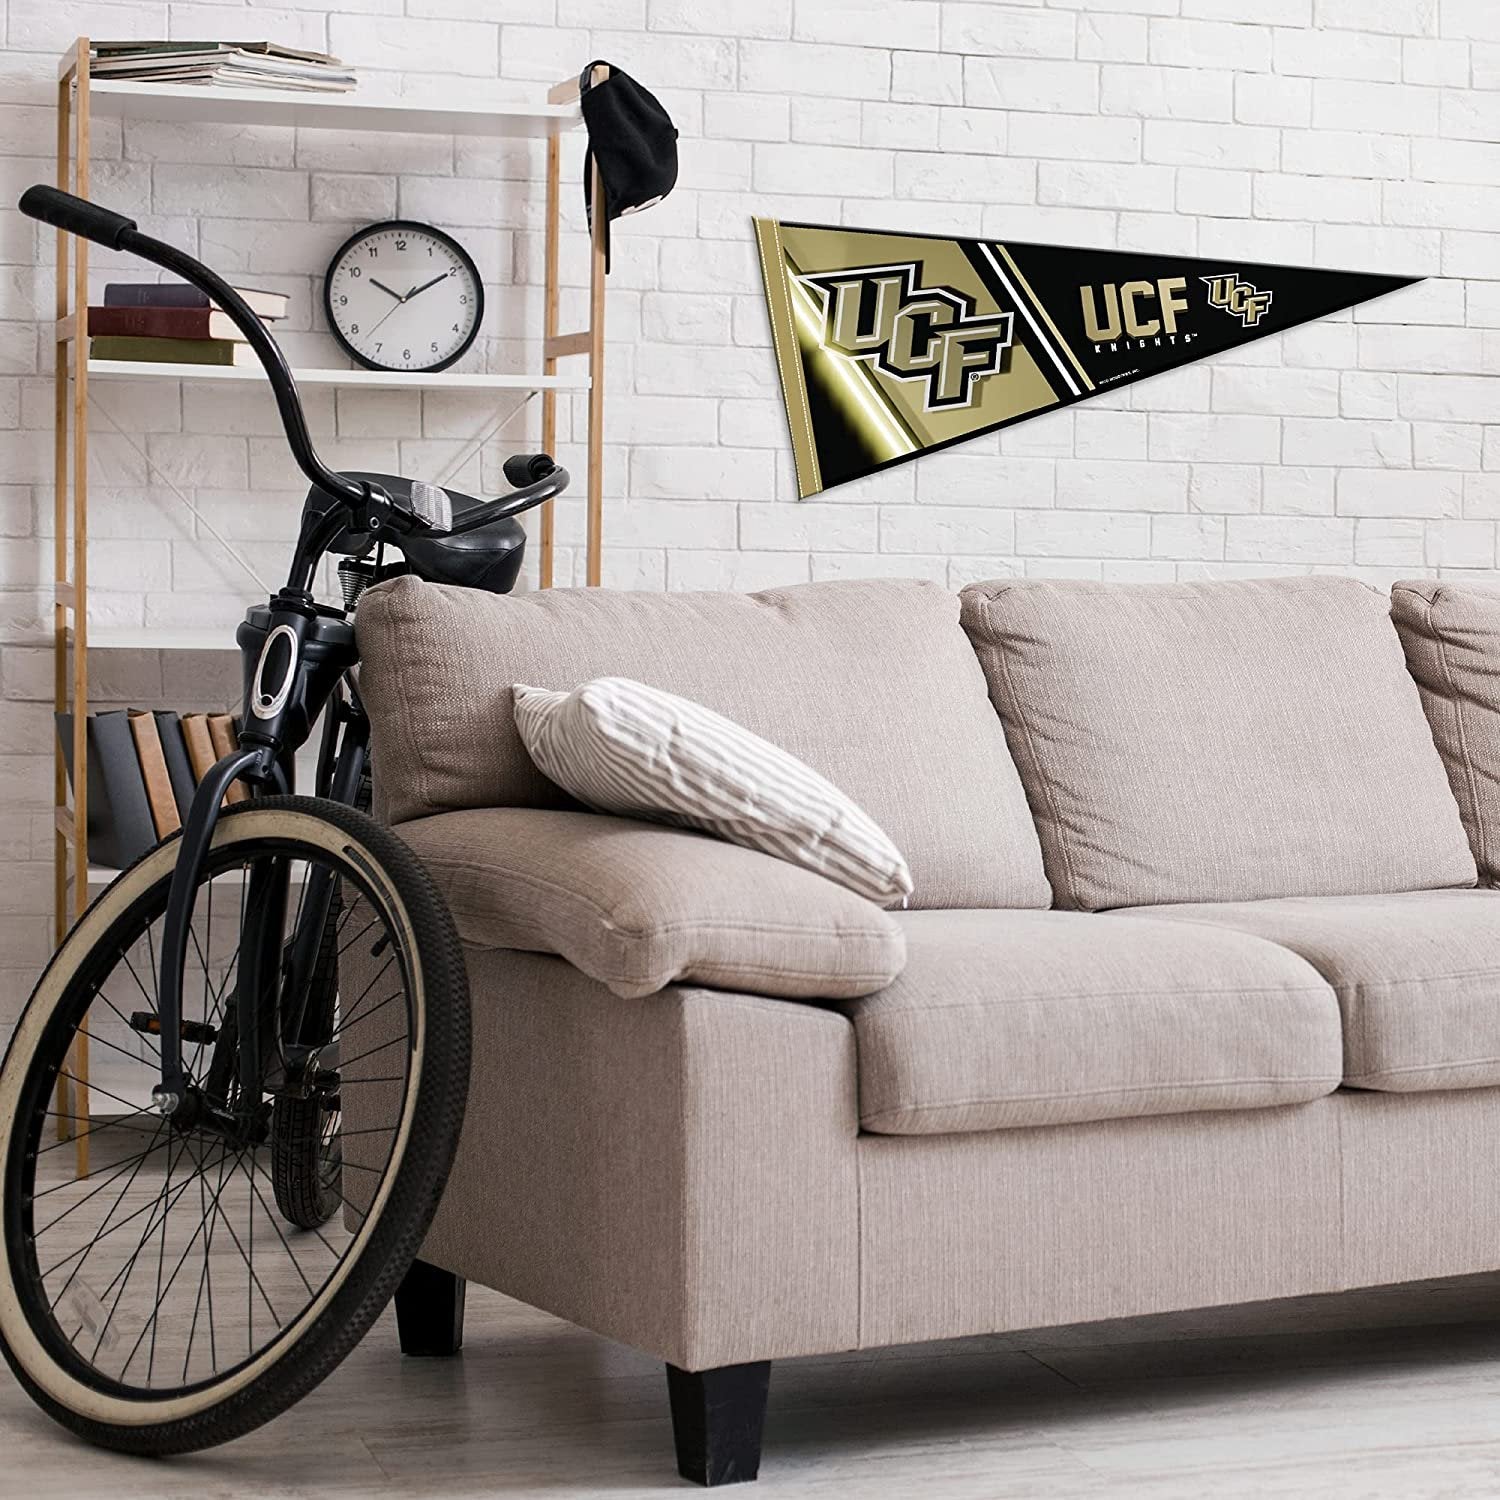 University of Central Florida UCF Knights Soft Felt Pennant, Primary Design, 12x30 Inch, Easy To Hang